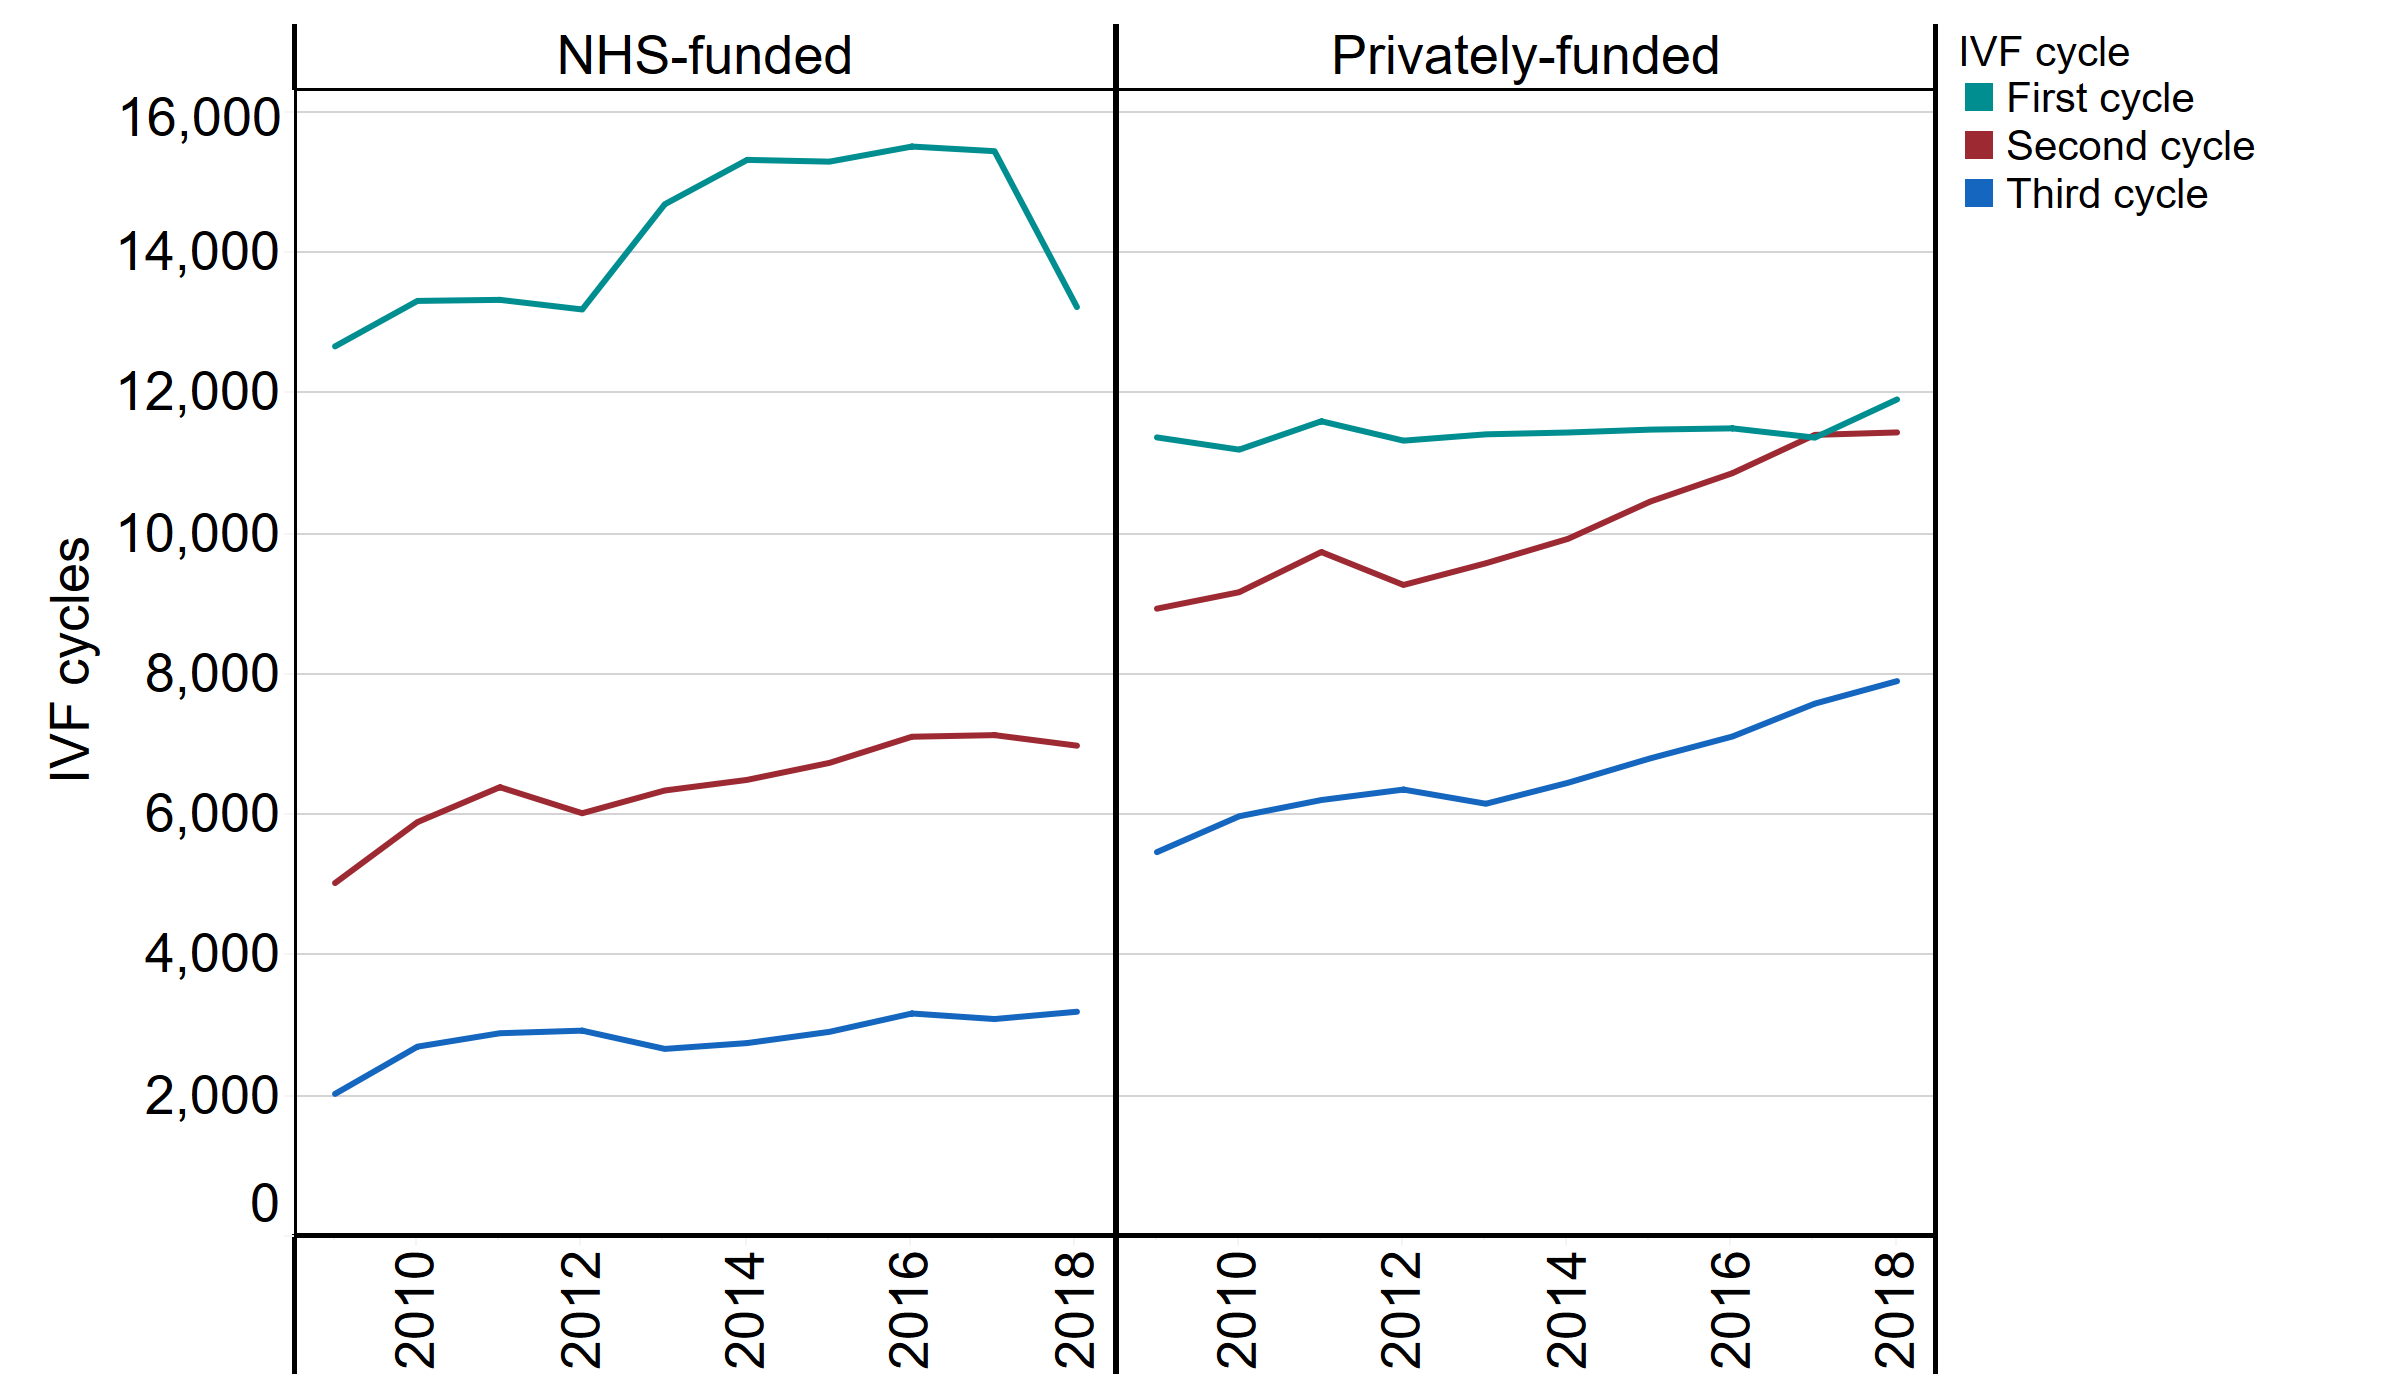 This line chart shows number of first, second and third IVF cycles by funding type (NHS or private). First IVF cycles have mainly been funded by the NHS, but this number has decreased from almost 16,000 cycles to 13,000 cycles from 2017 to 2018. Although first cycle NHS cycles are decreasing, there has not been much change in privately-funded first cycles. Second and third IVF cycles have mainly been funded privately and this has been steadily increasing since 2013.